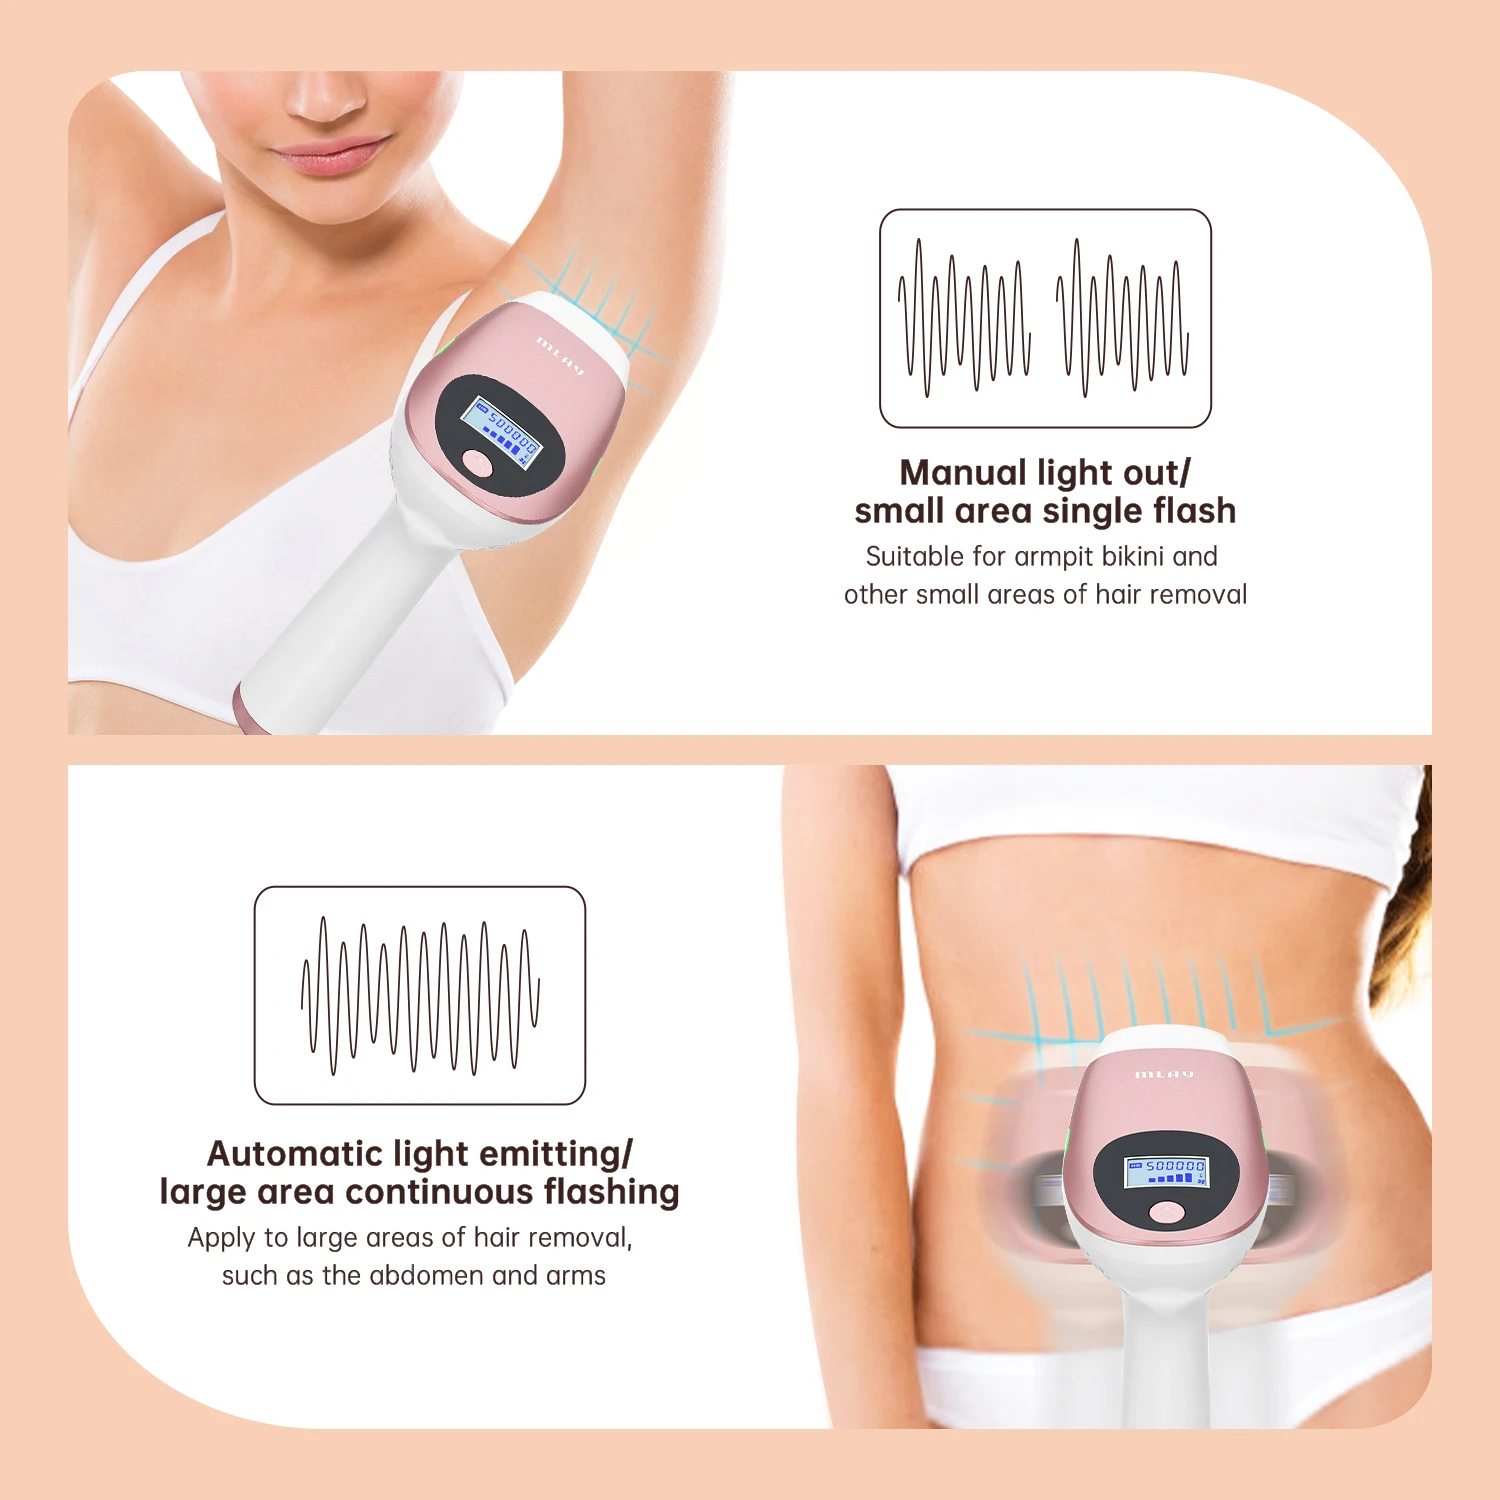 MLAY T3 Home Handheld Mini IPL Laser Device Portable Skin Rejuvenation and Permanent Hair Removal with Acne Treatment Feature